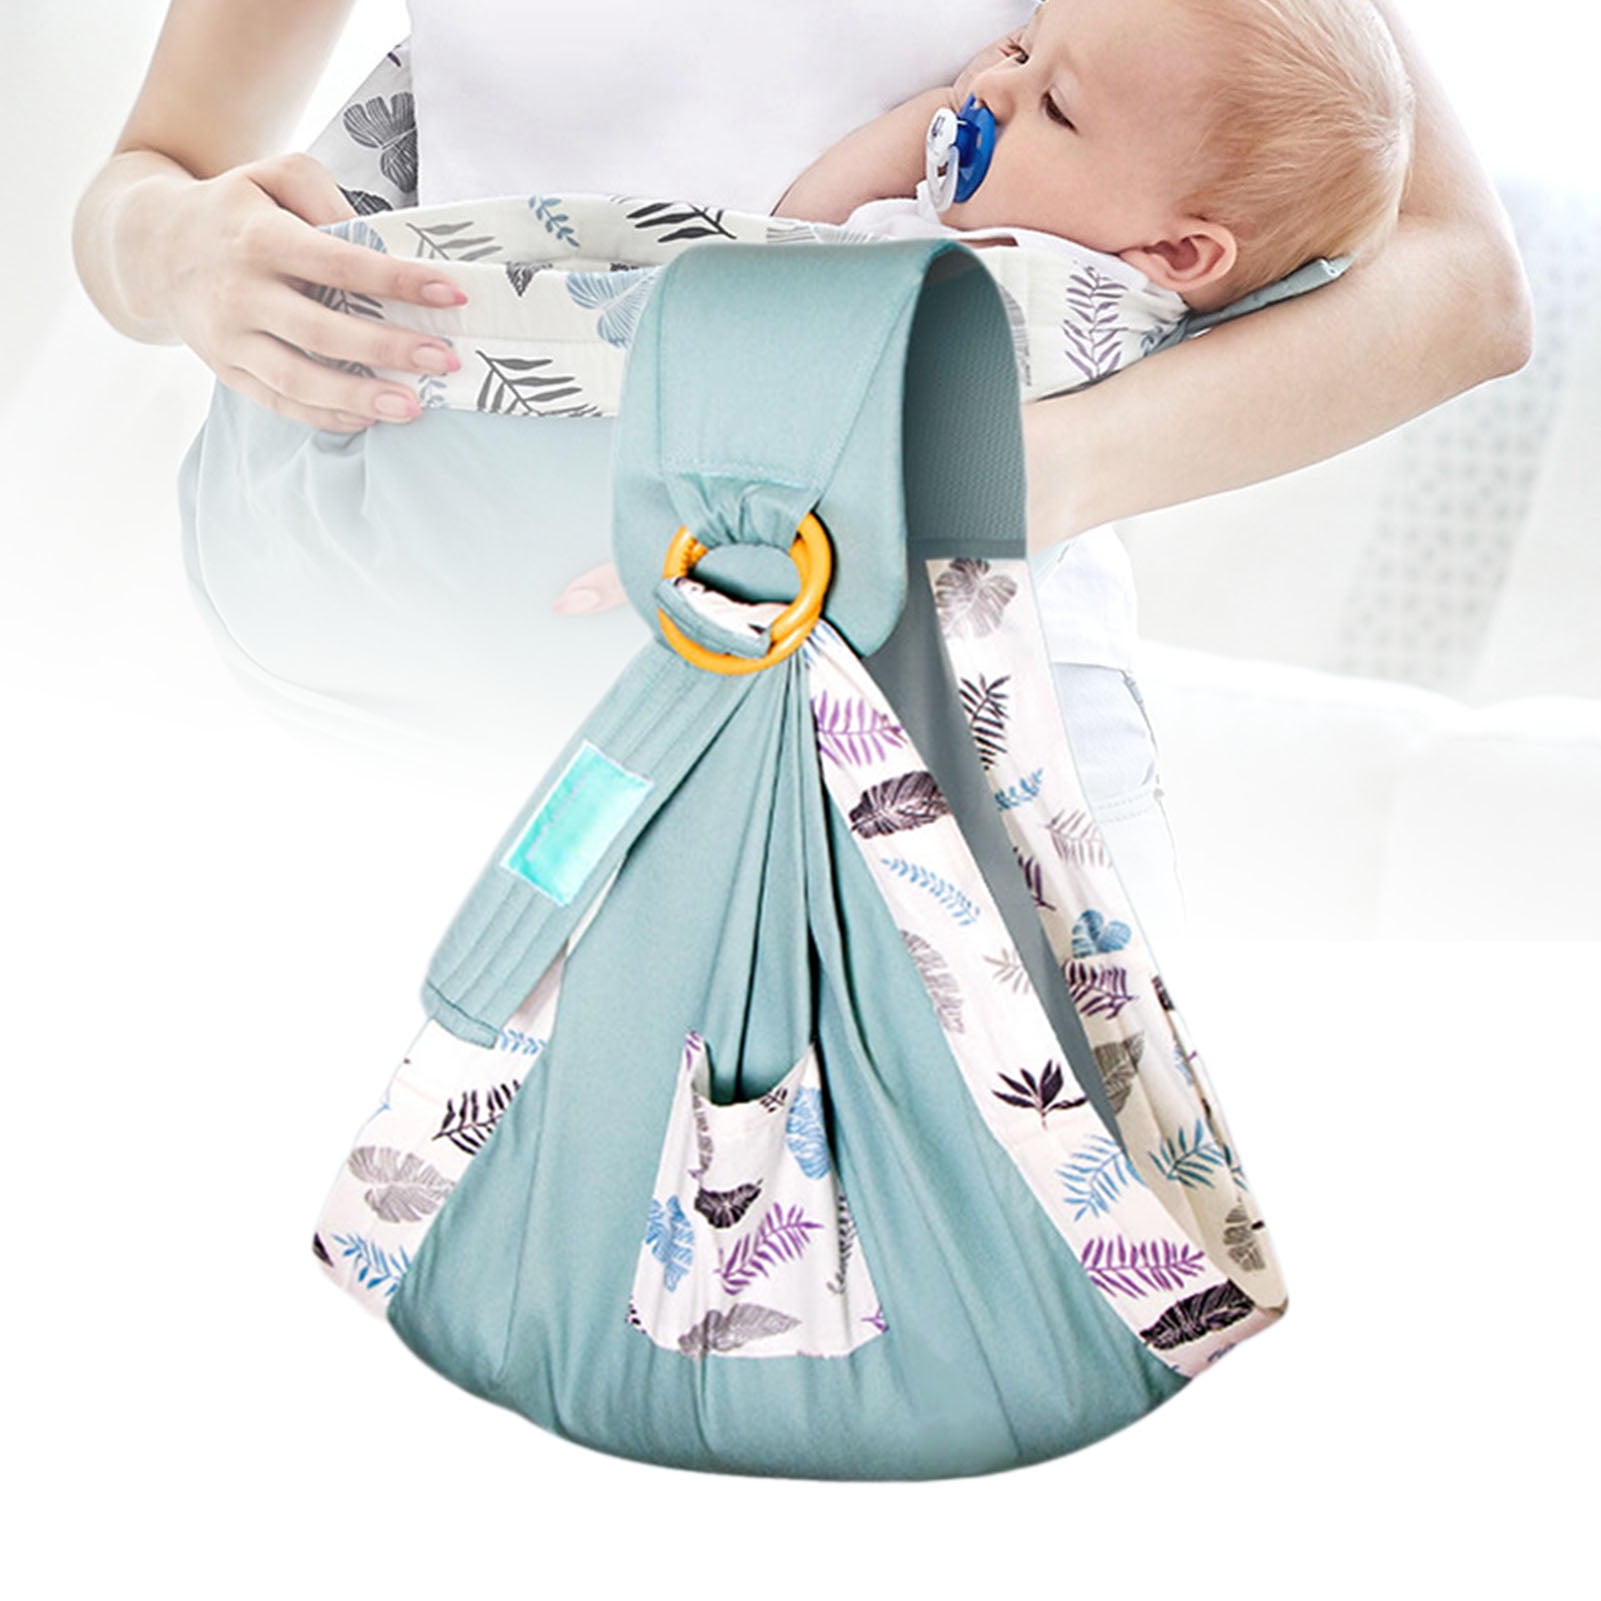 Infant Toddler WaterProof Sling Clothink Baby Wrap Carrier for Newborn Breathable Baby Holder 